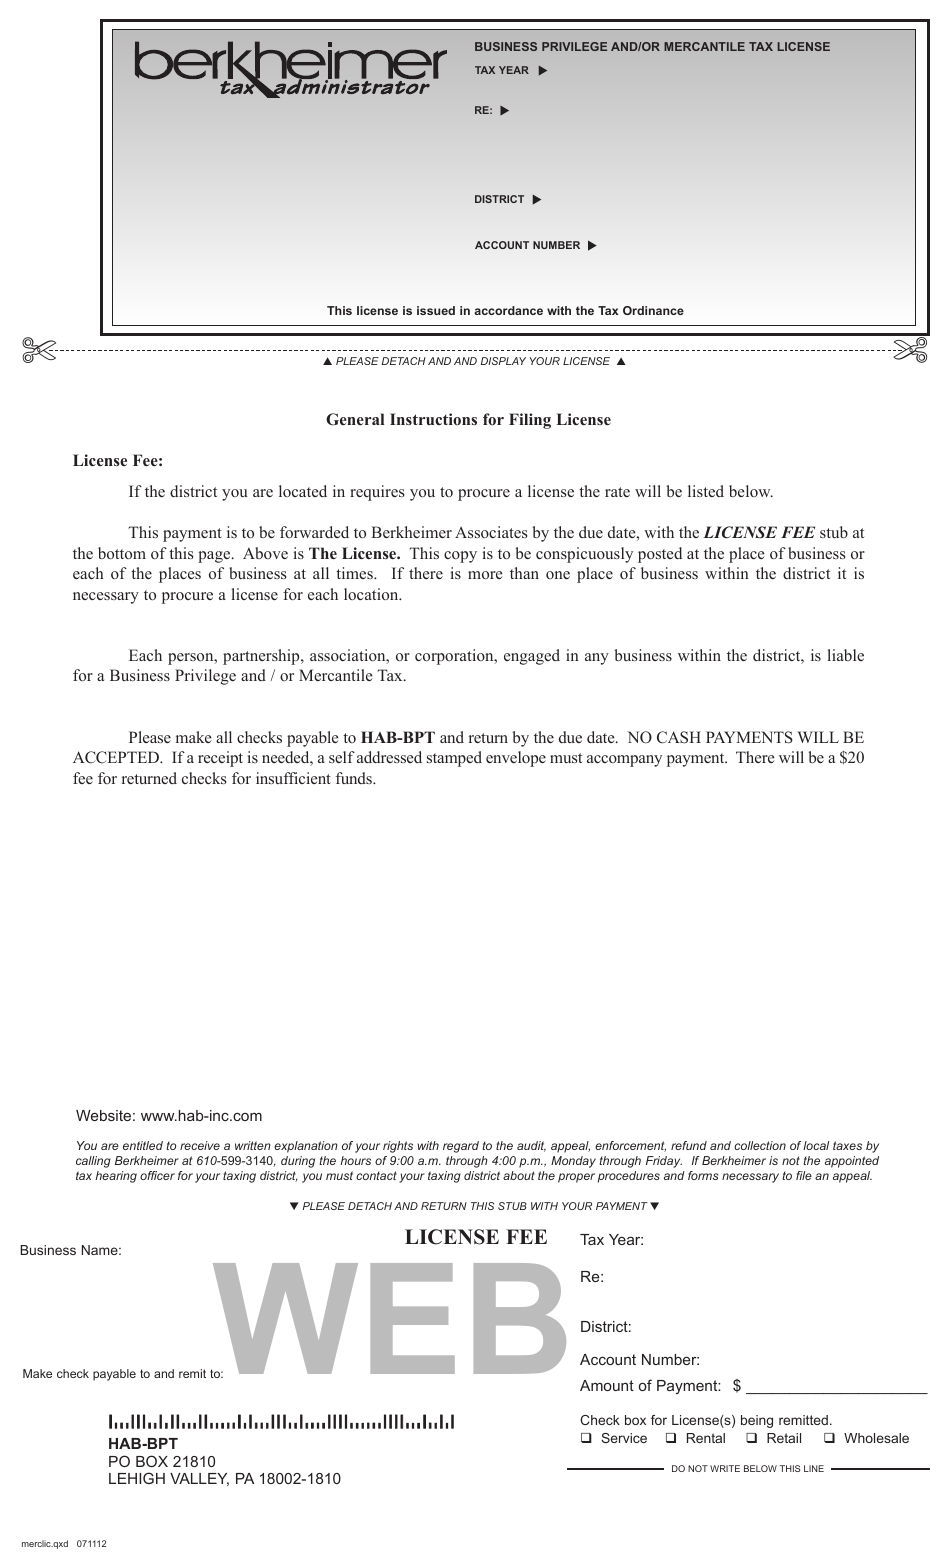 Business Privilege and / or Mercantile Tax License Form - Lehigh Valley, Pennsylvania, Page 1